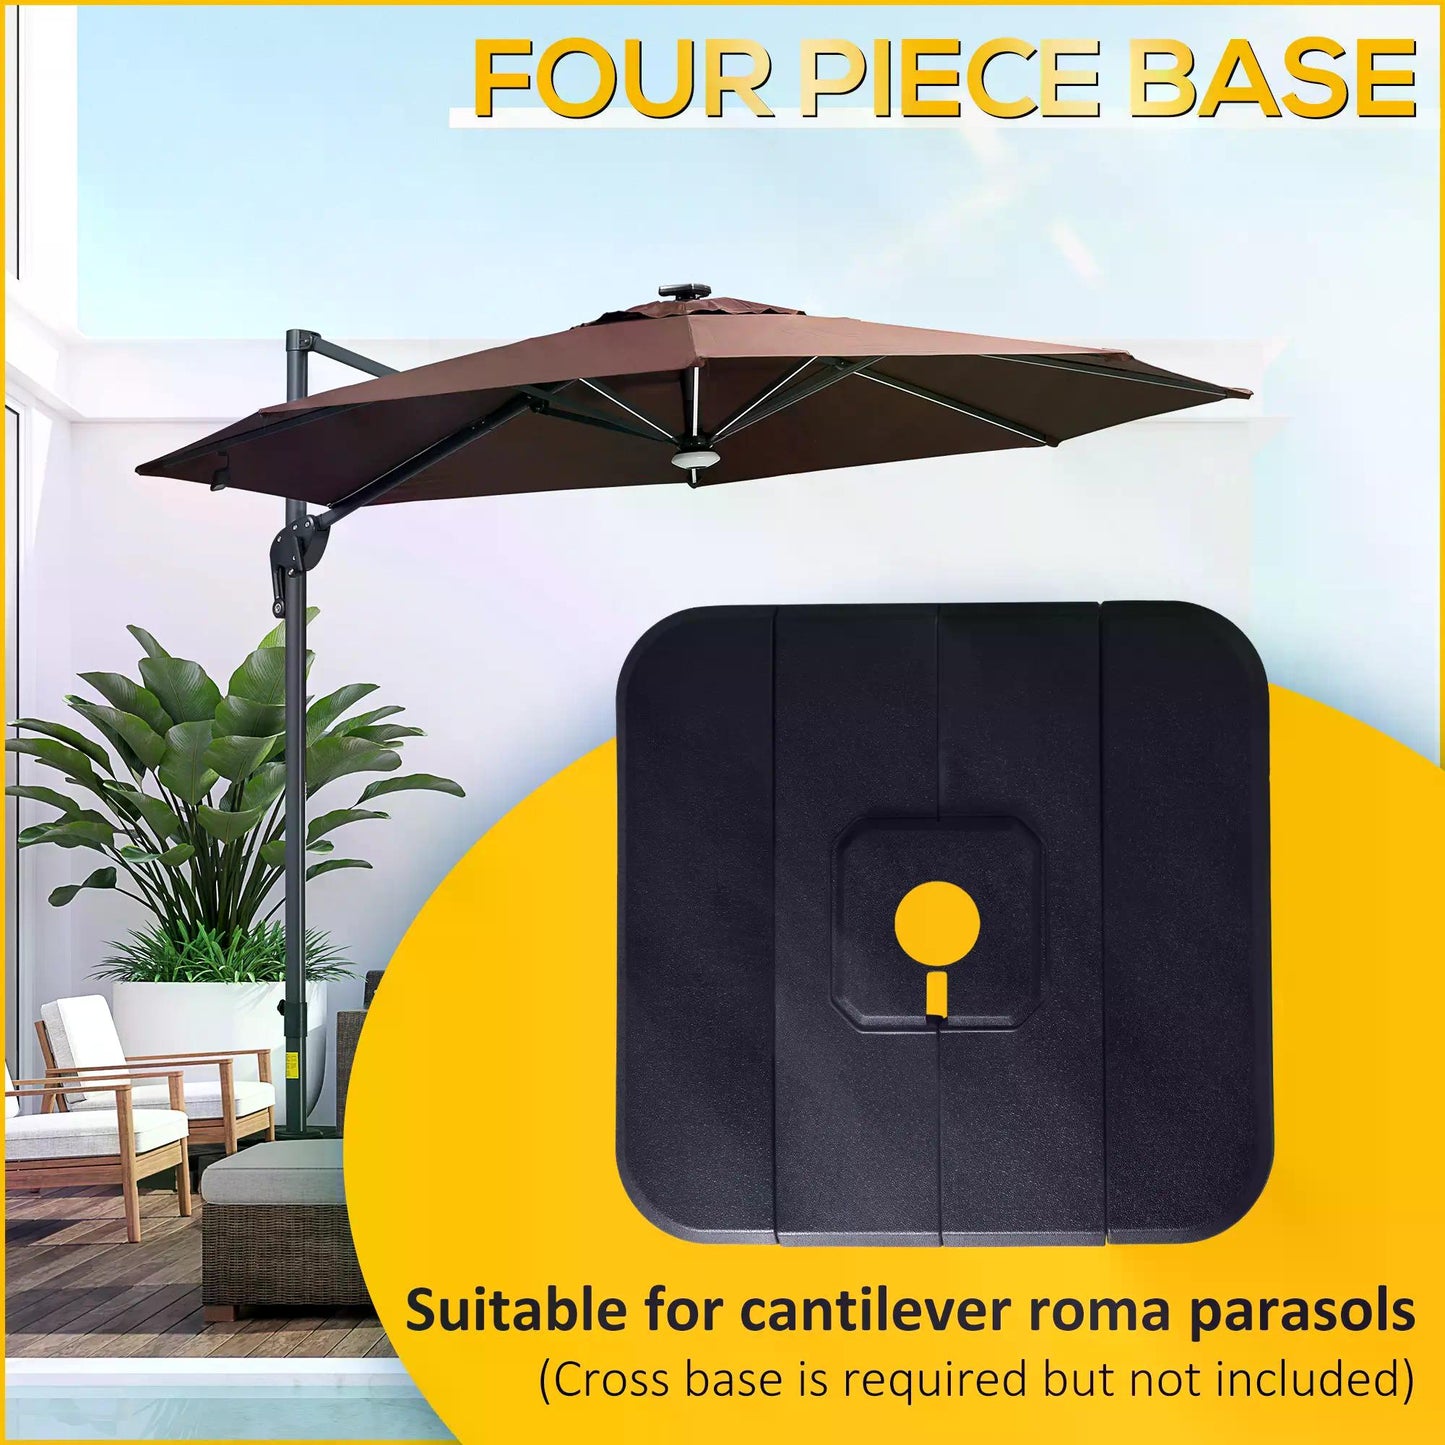 Outsunny Set of 4 Cantilever Parasol Base Stand Outdoor Umbrella Weights, Can Be Filled with Sand or Water, Black